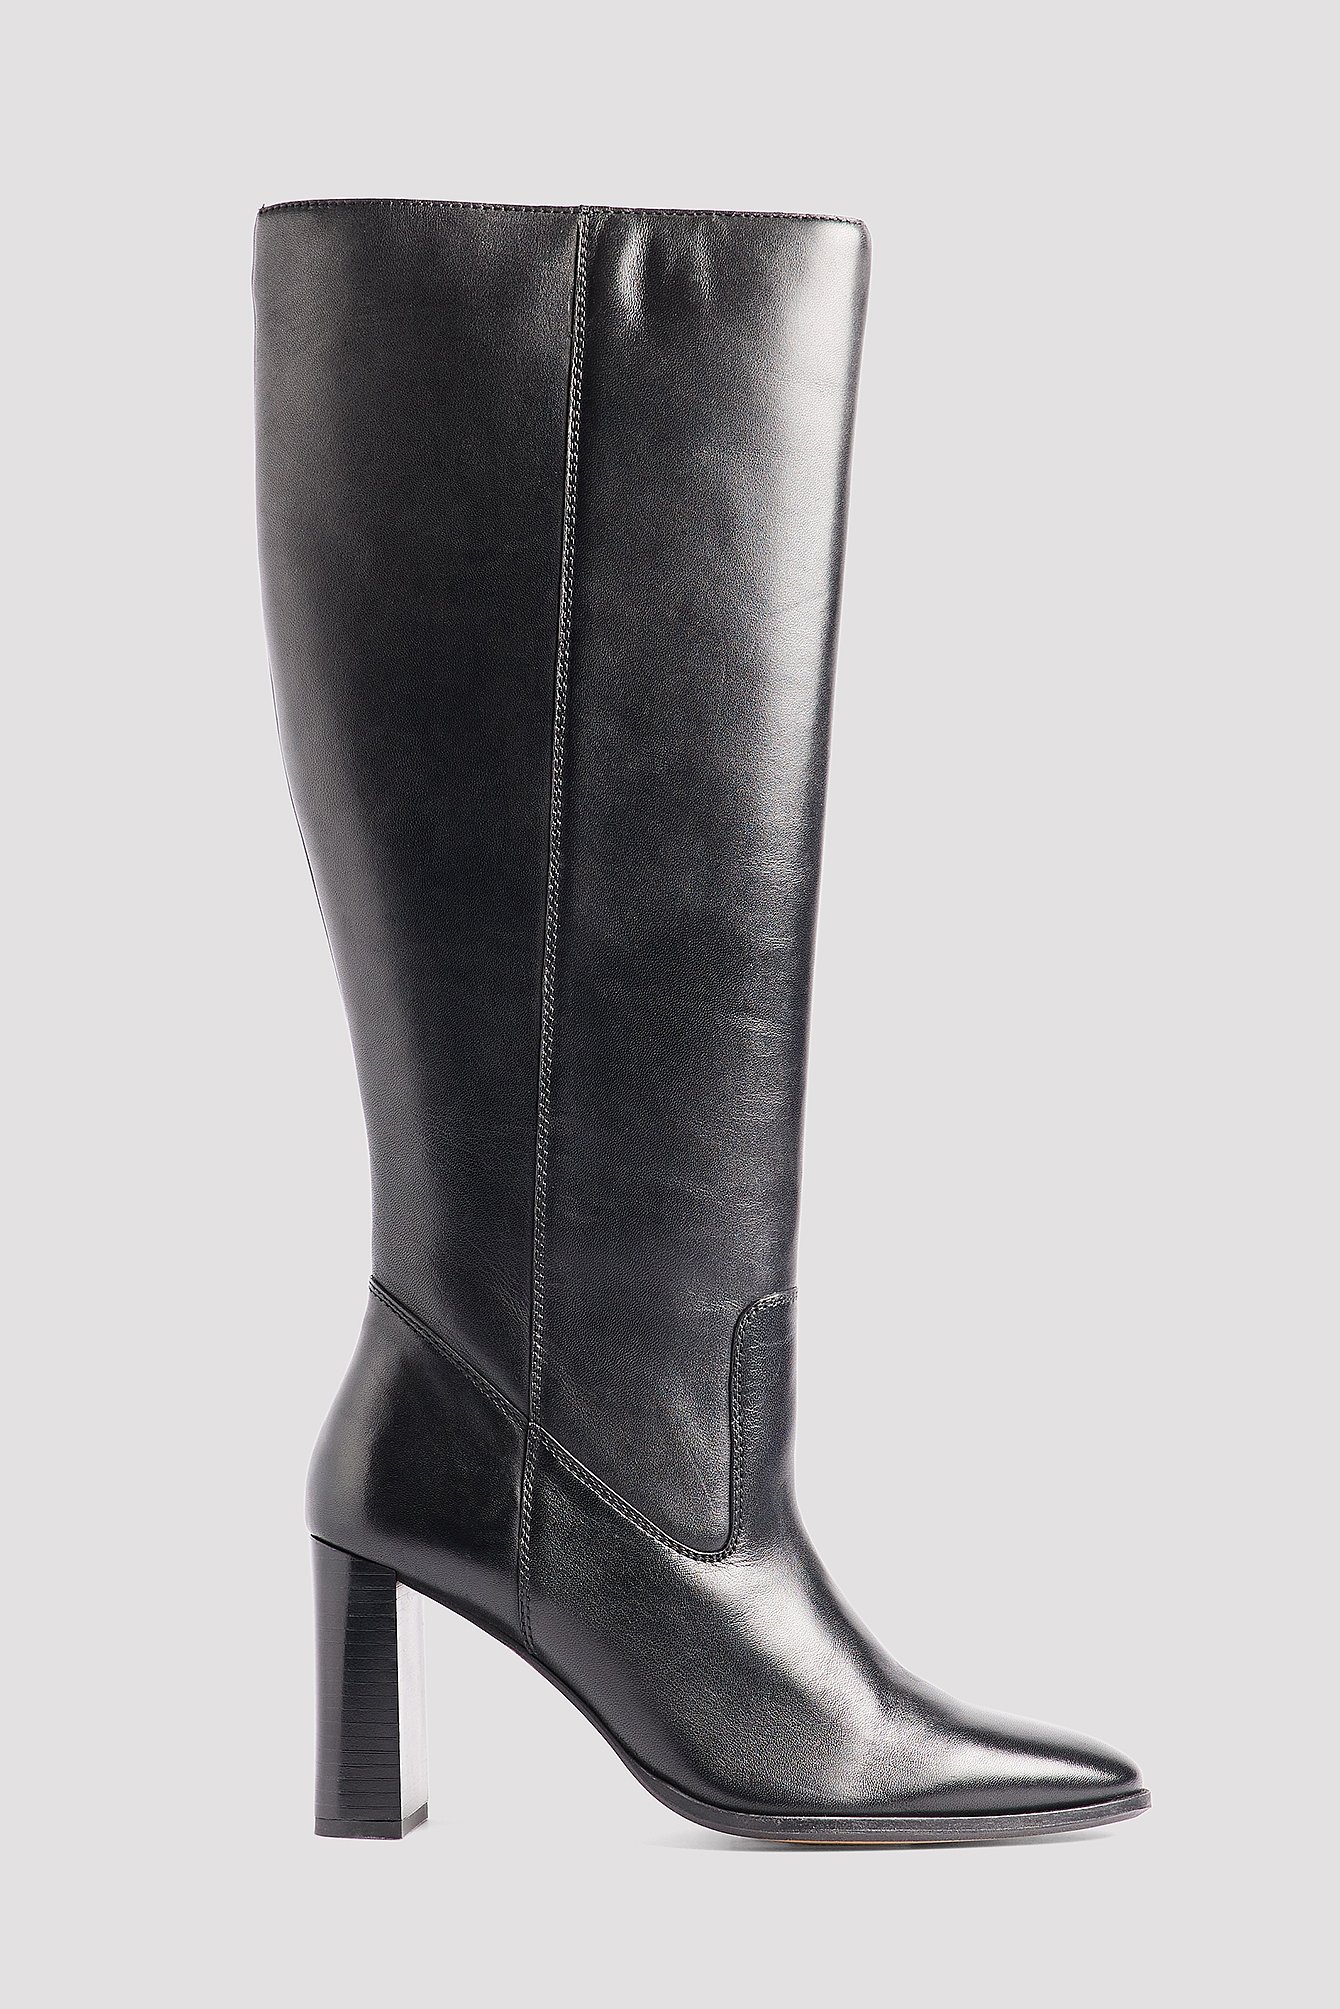 Womens Knee High boots | Find the perfect boots at NA-KD | NA-KD